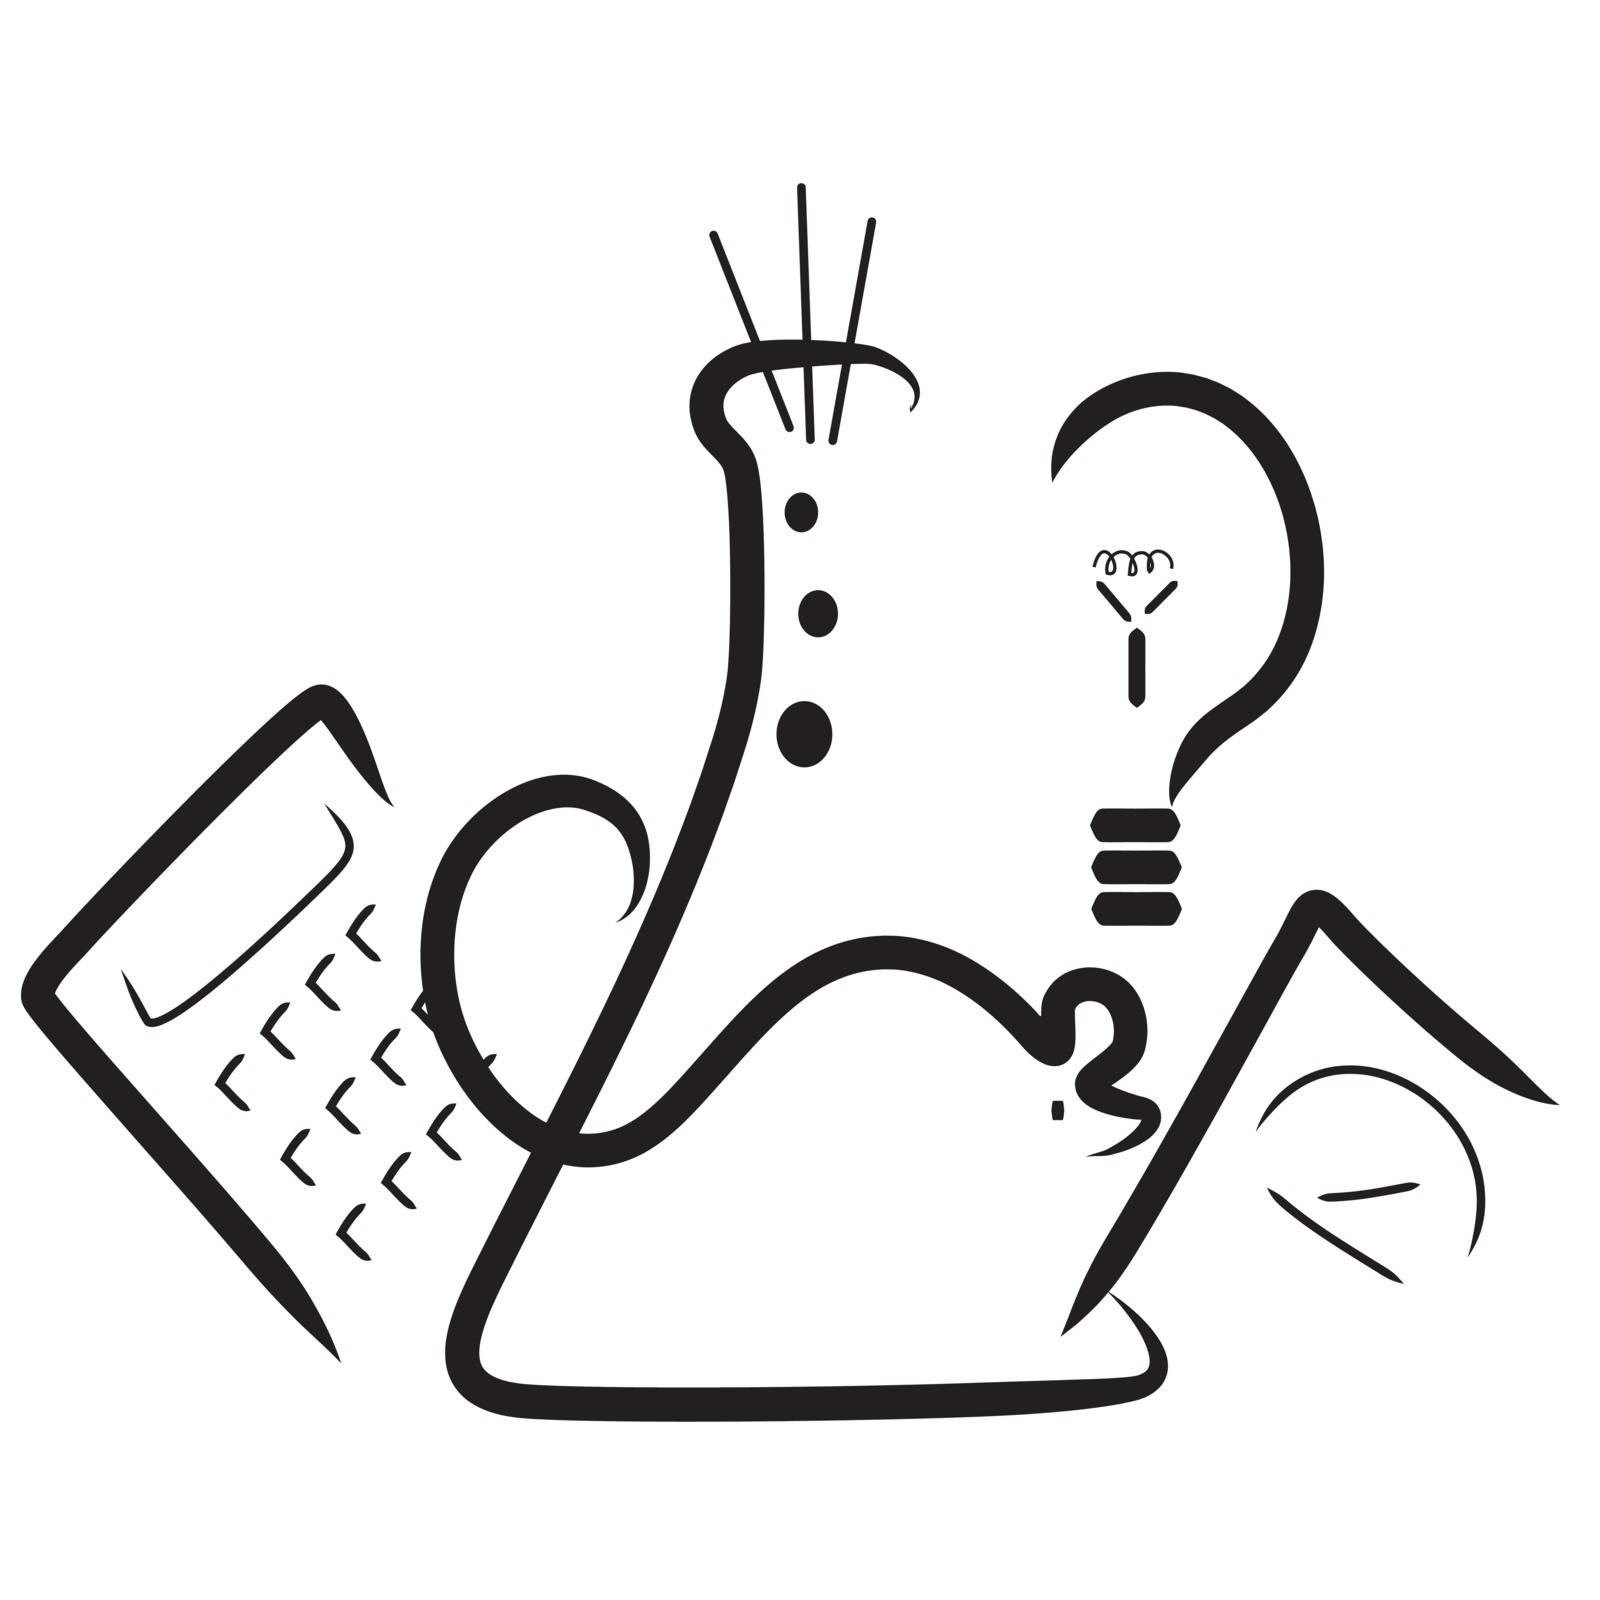 A stylized logo with elements for a science fair. A beaker, a mouse,a calculator, a light bulb and a scale 